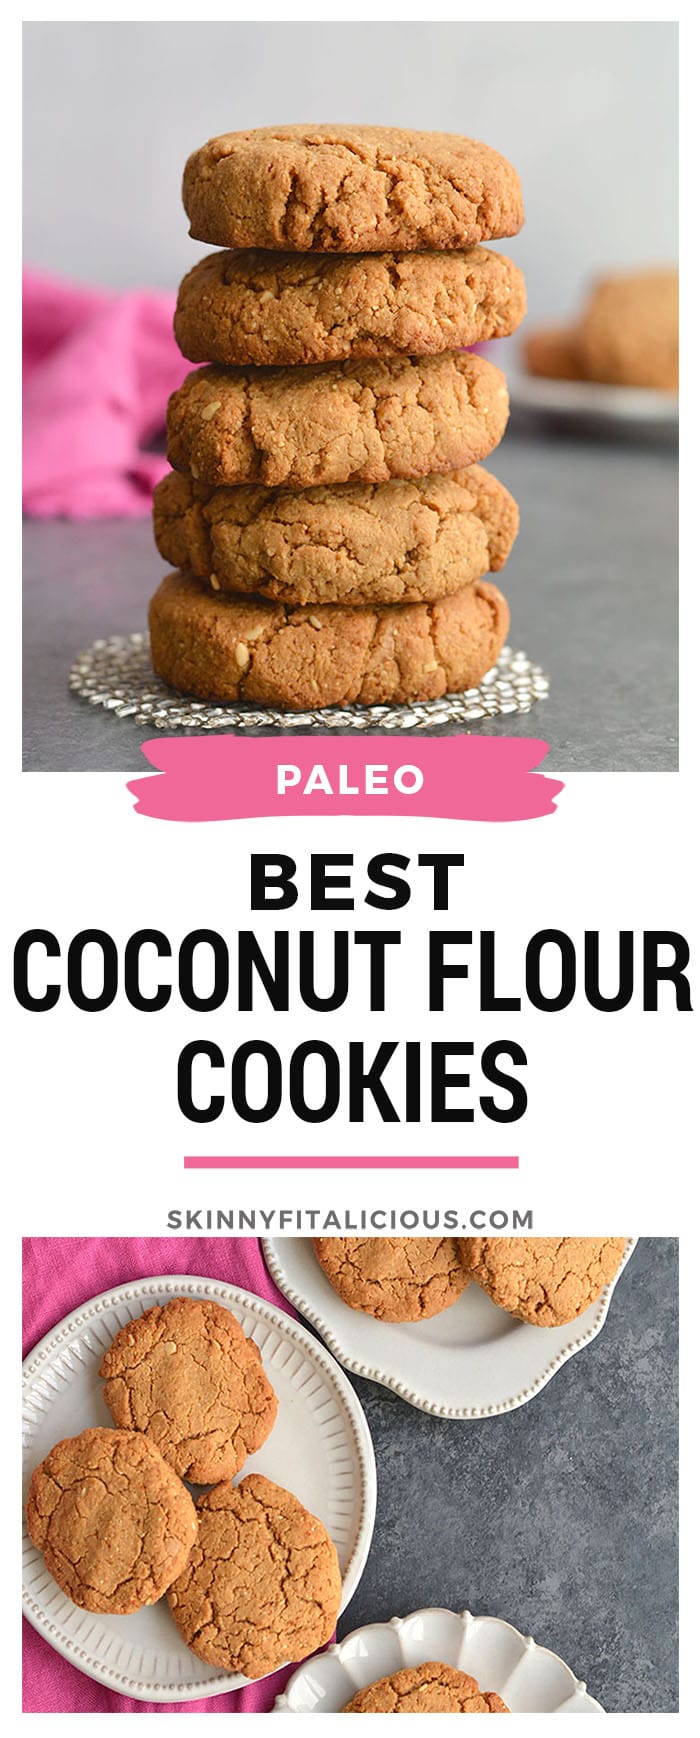 The Best Coconut Flour Cookies you'll ever eat! Made with peanut butter and lightly sweetened with coconut sugar, these thick and chewy cookies are too good to be true. Only 6 ingredients, quick to make and easy to customize. This coconut flour recipe is the only one you will ever need. Paleo swap included! Gluten Free + Low Calorie + Paleo